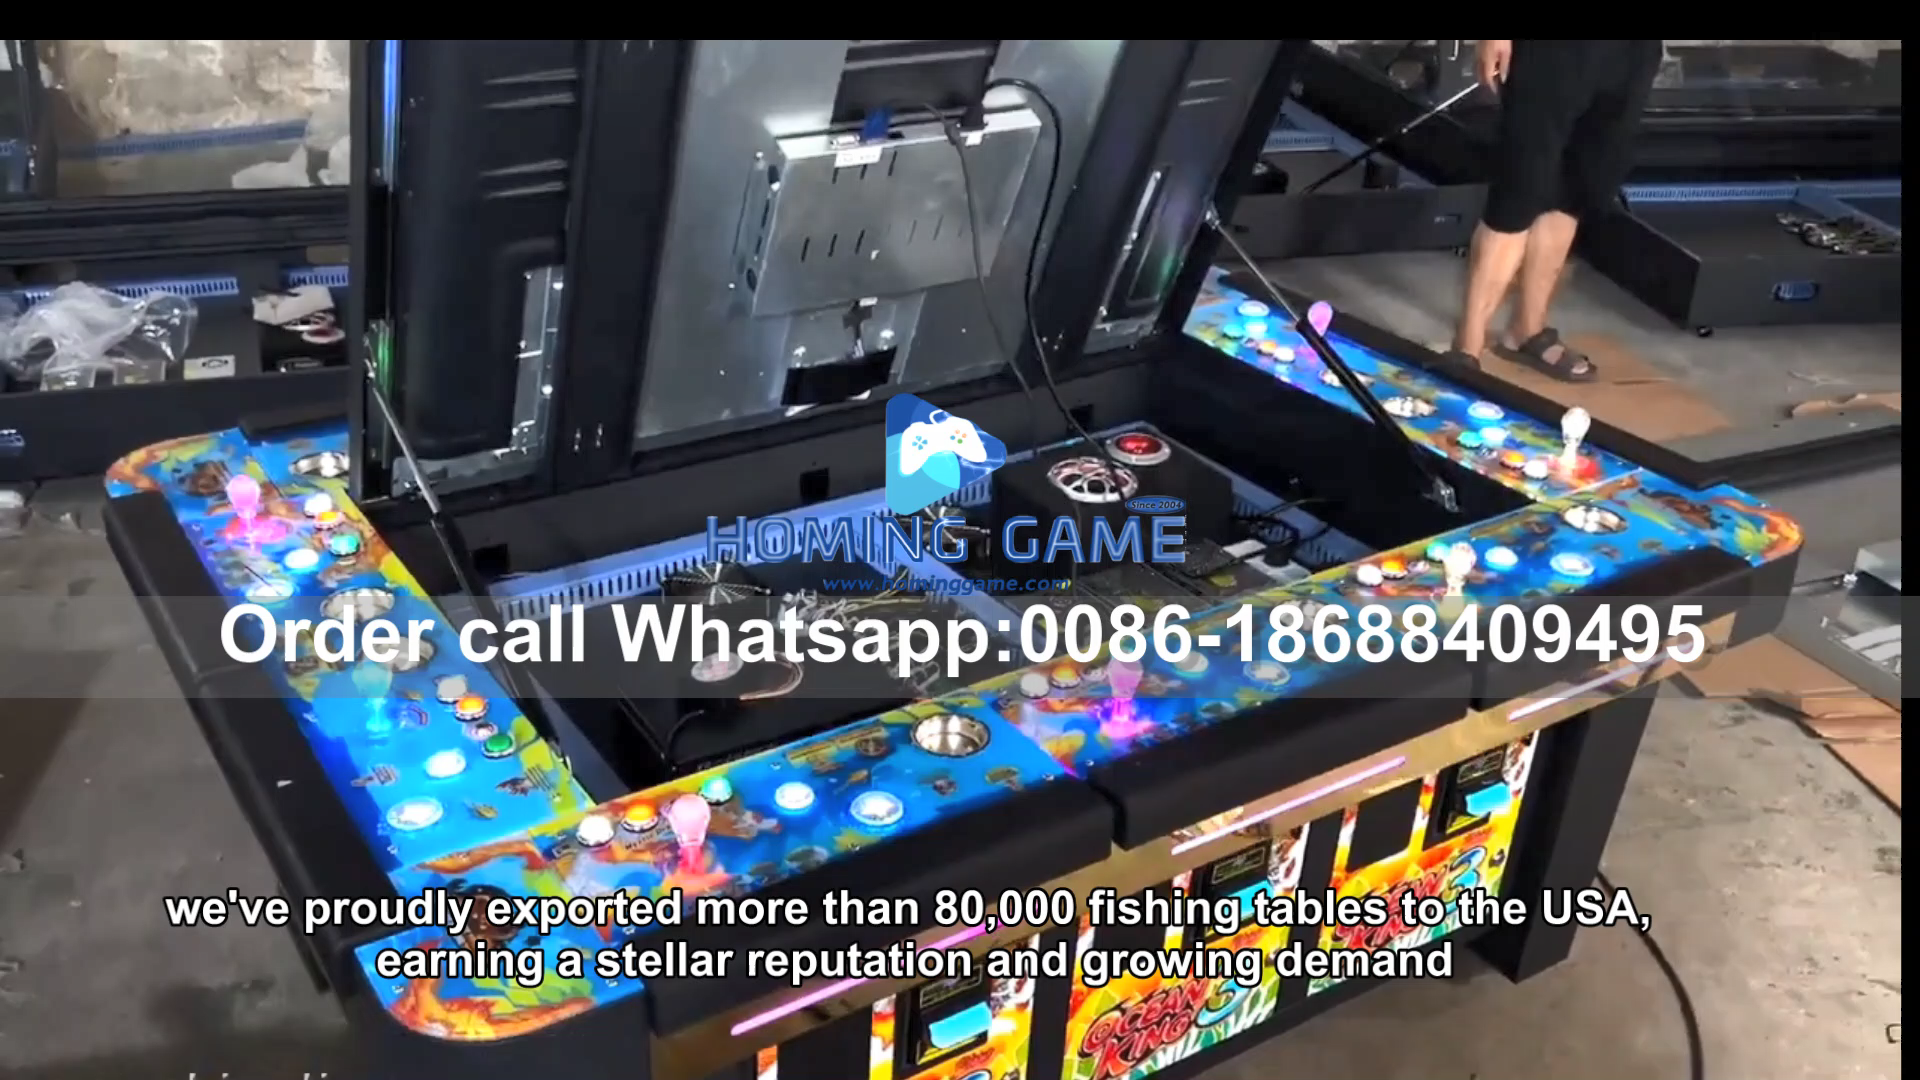 Explore the Best Fishing Table Game Machines with HomingGame! #FishingGame#FishingTableGameMachine(Order Call Whatsapp:0086-18688409495)